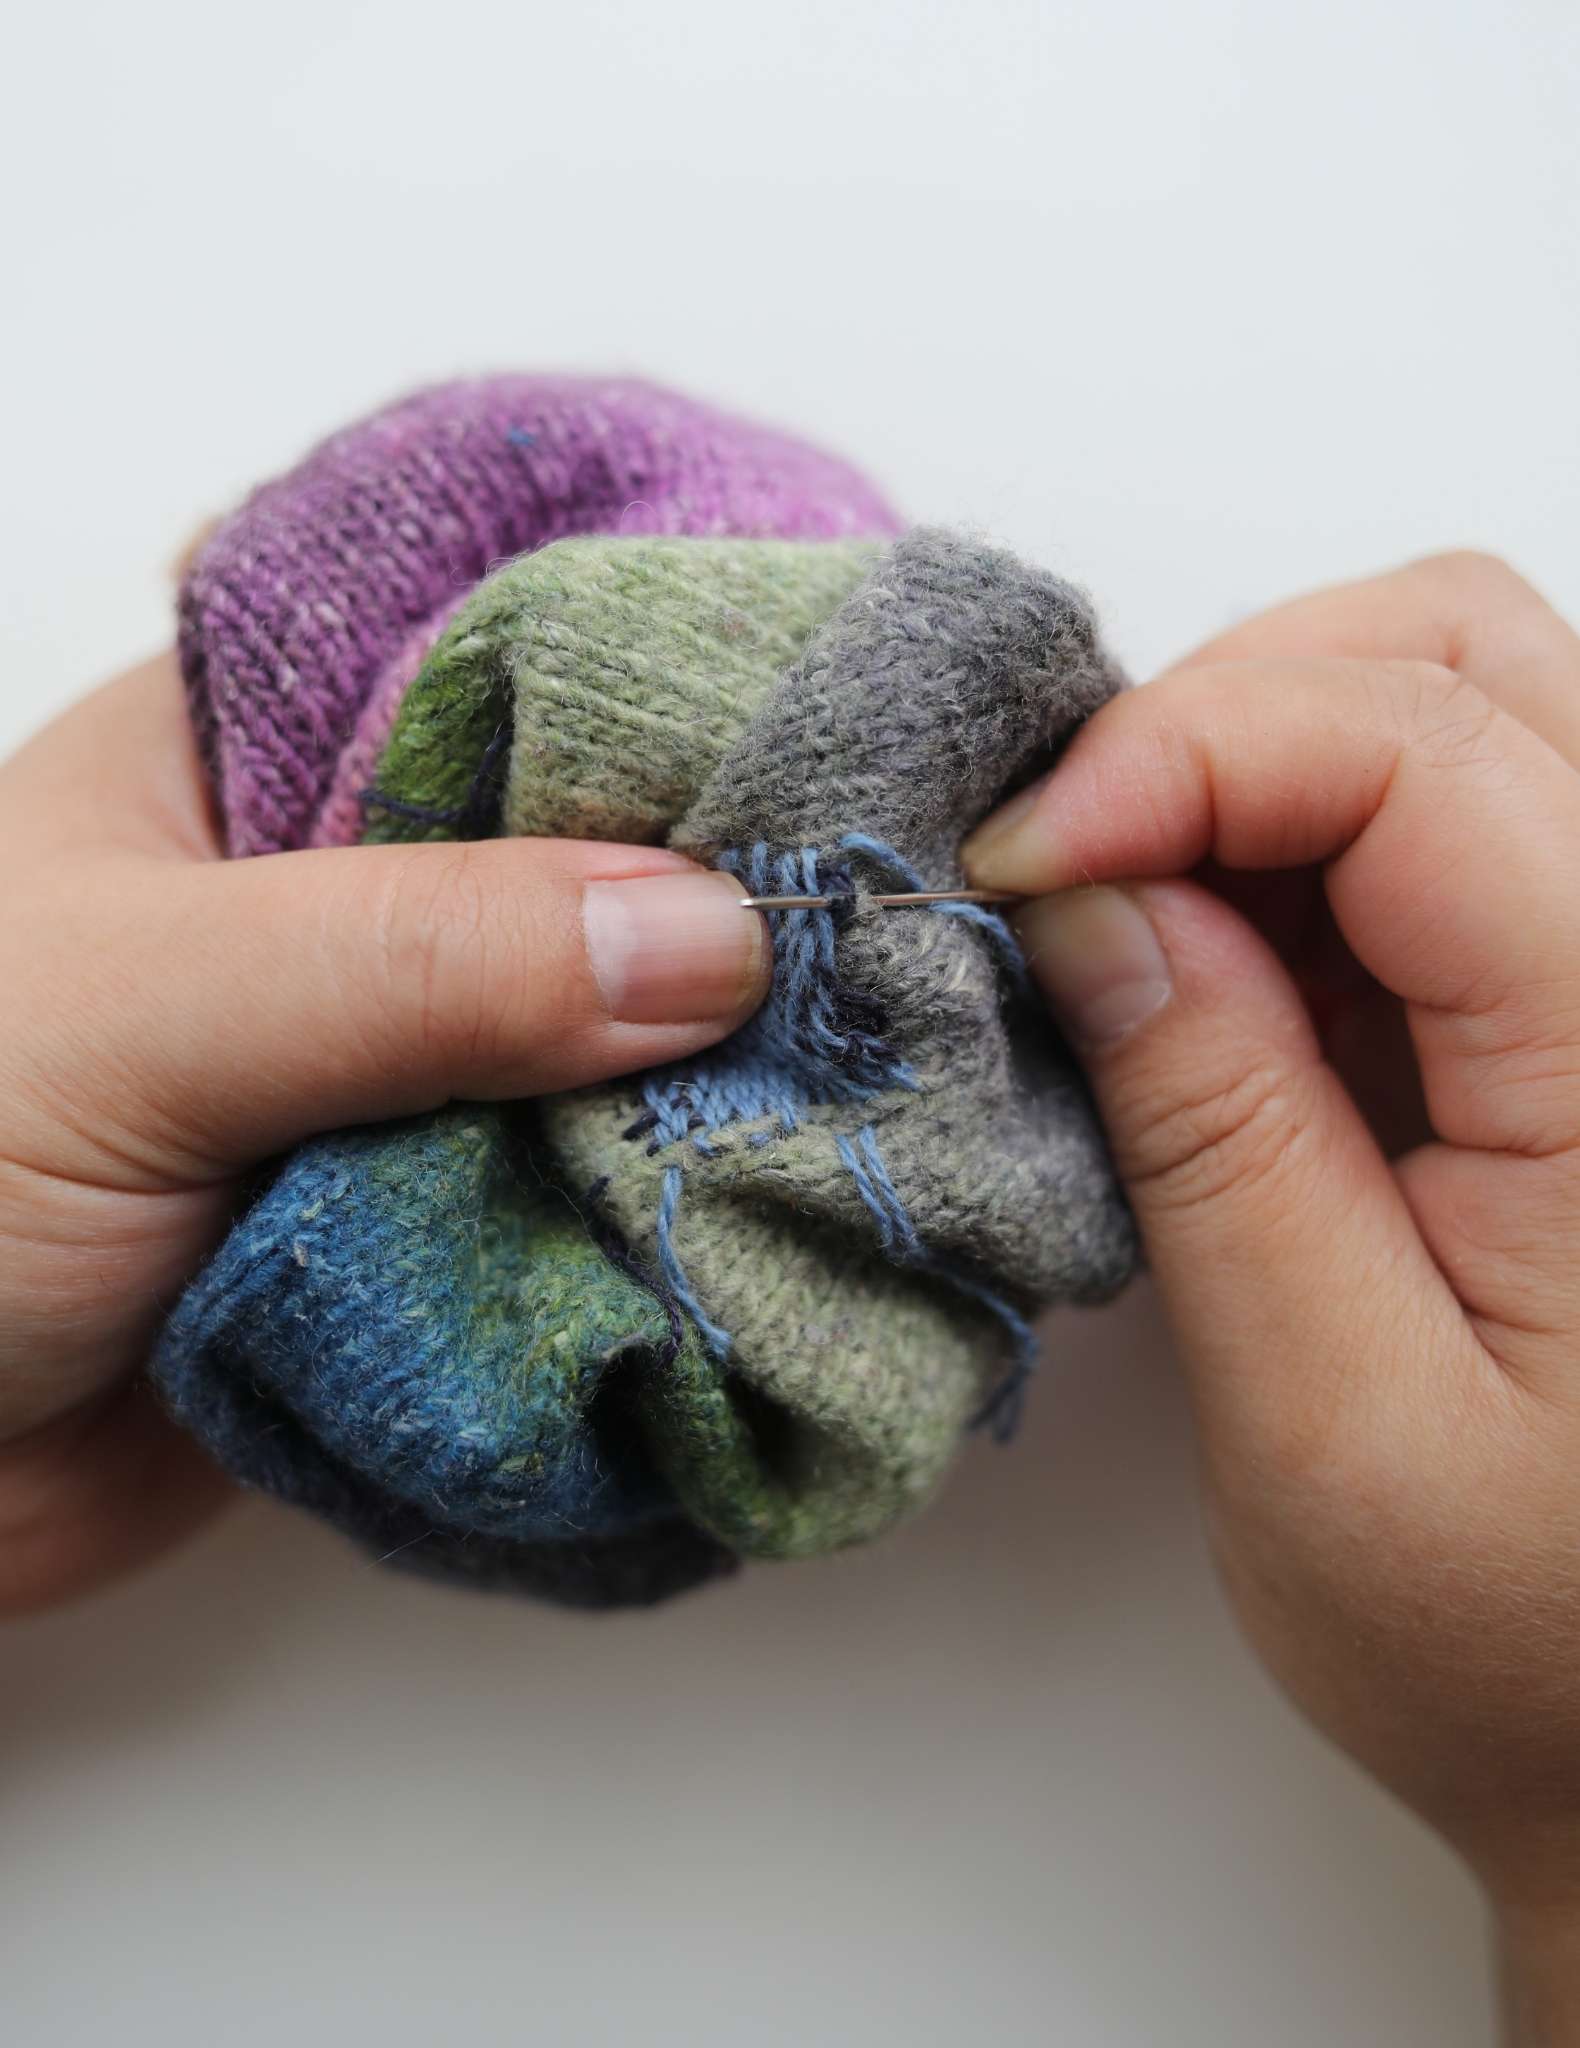 The sock has been scrunched up and the darning loom removed. Hands hold the sock near the patched hole and the right hand is hand stitching the top of the darned area.